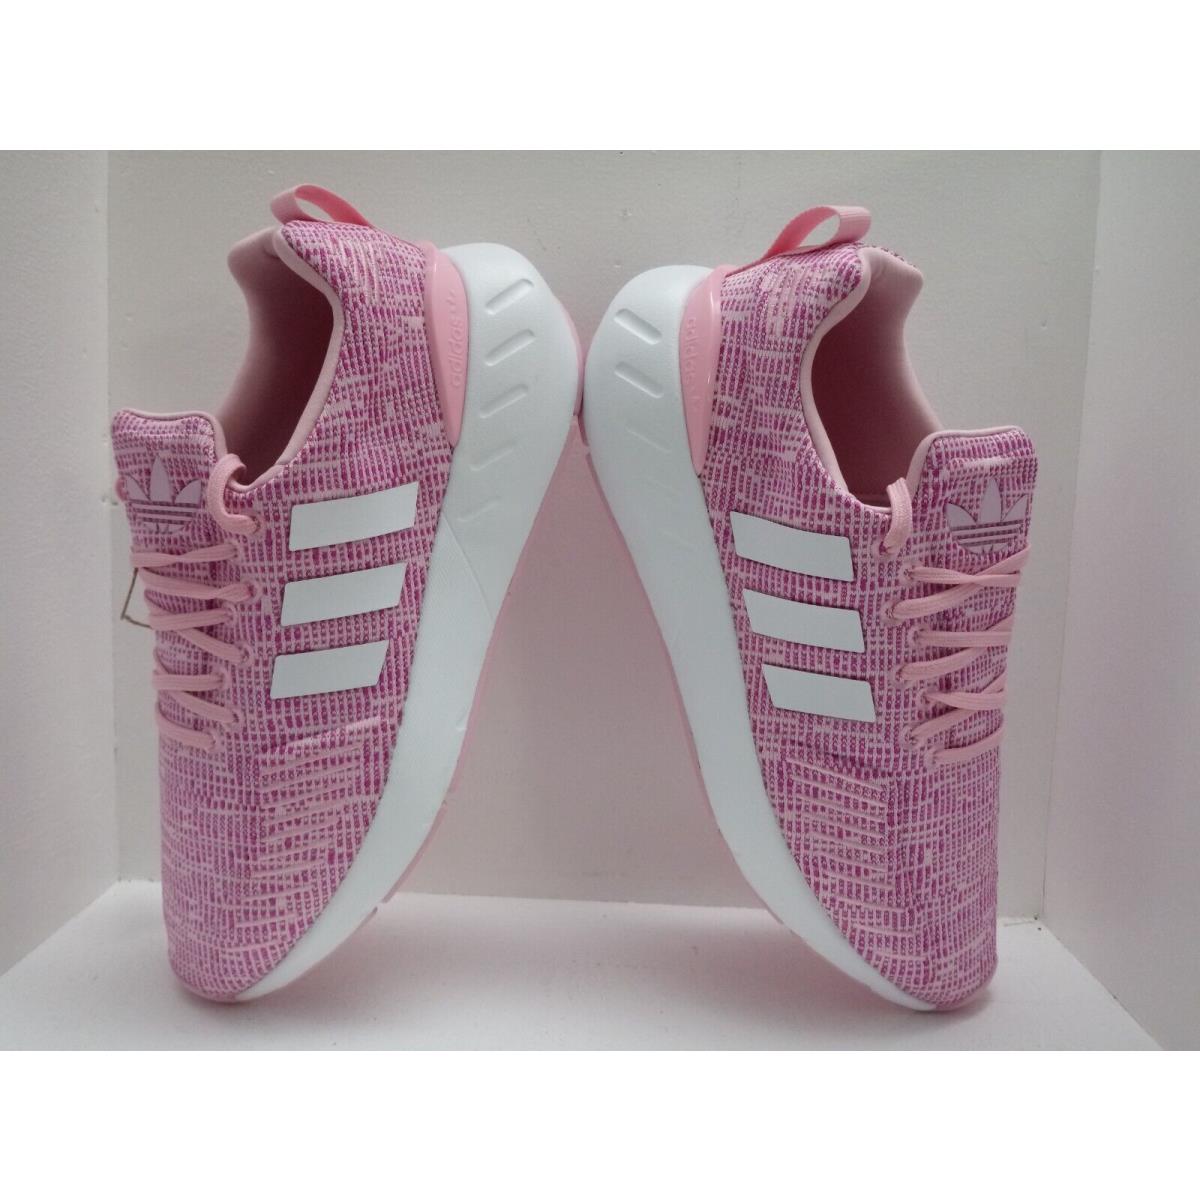 Adidas shoes  - PINK/WHITE 4